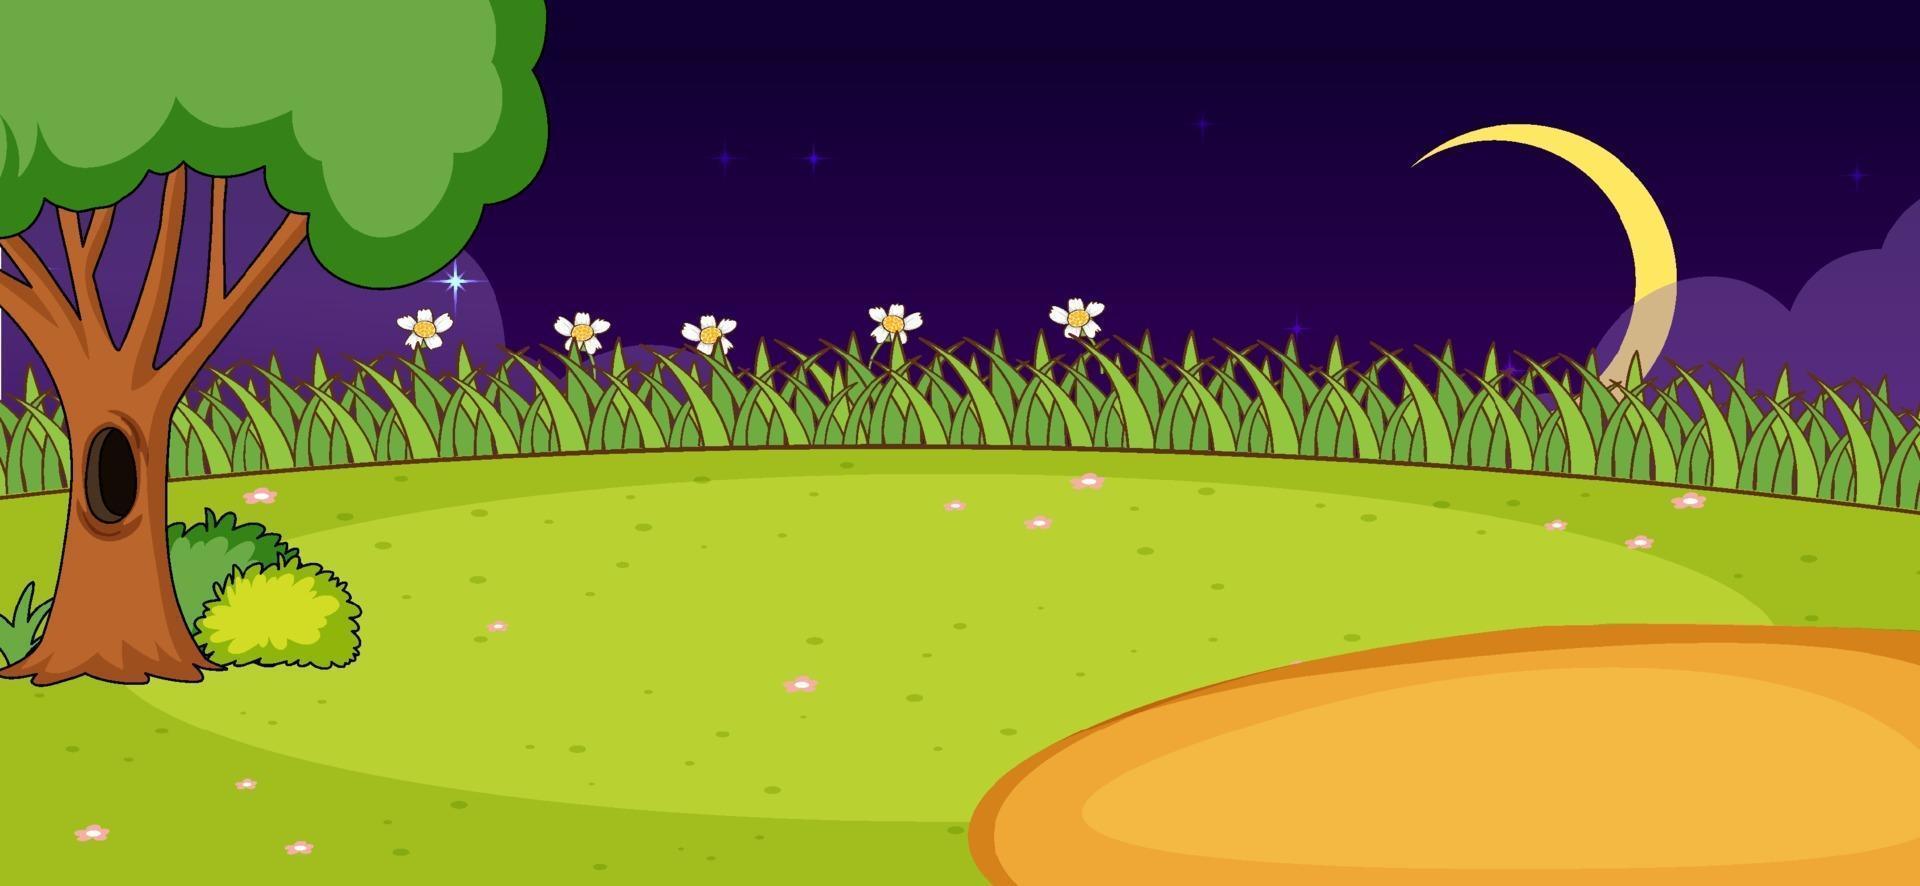 Empty park nature scene at night in simple style vector